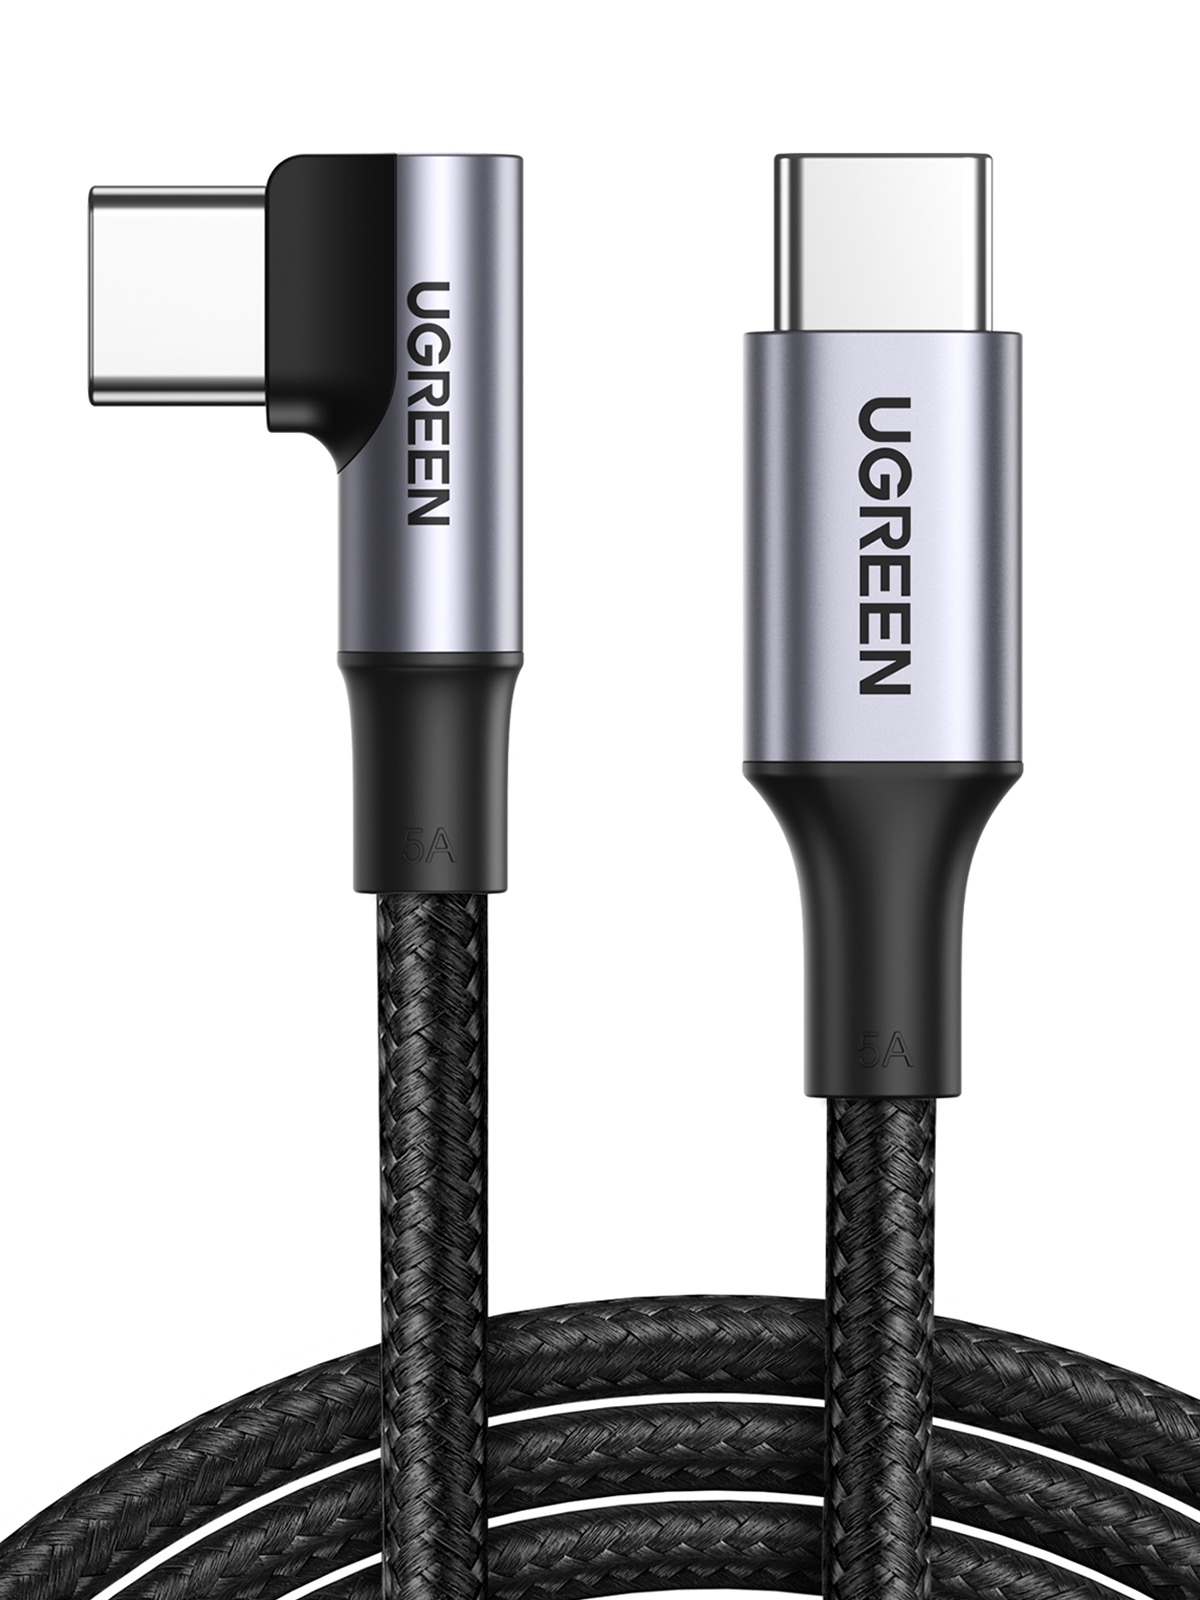 UGREEN USB-C 2.0 to Angled USB-C M/M Cable Aluminium Shell with Braided 1m (Black)